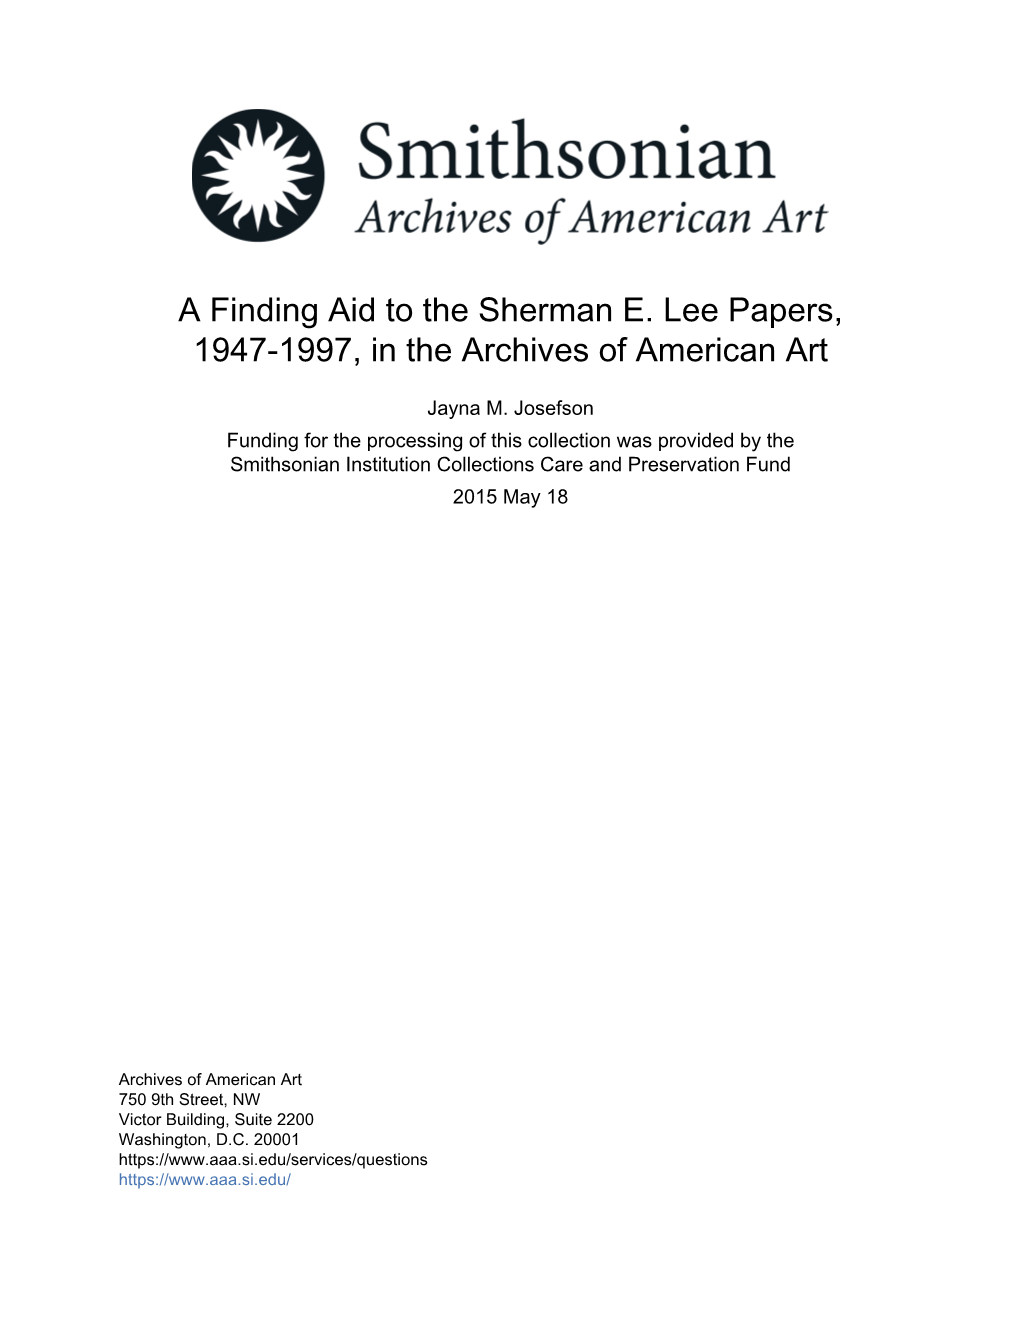 A Finding Aid to the Sherman E. Lee Papers, 1947-1997, in the Archives of American Art